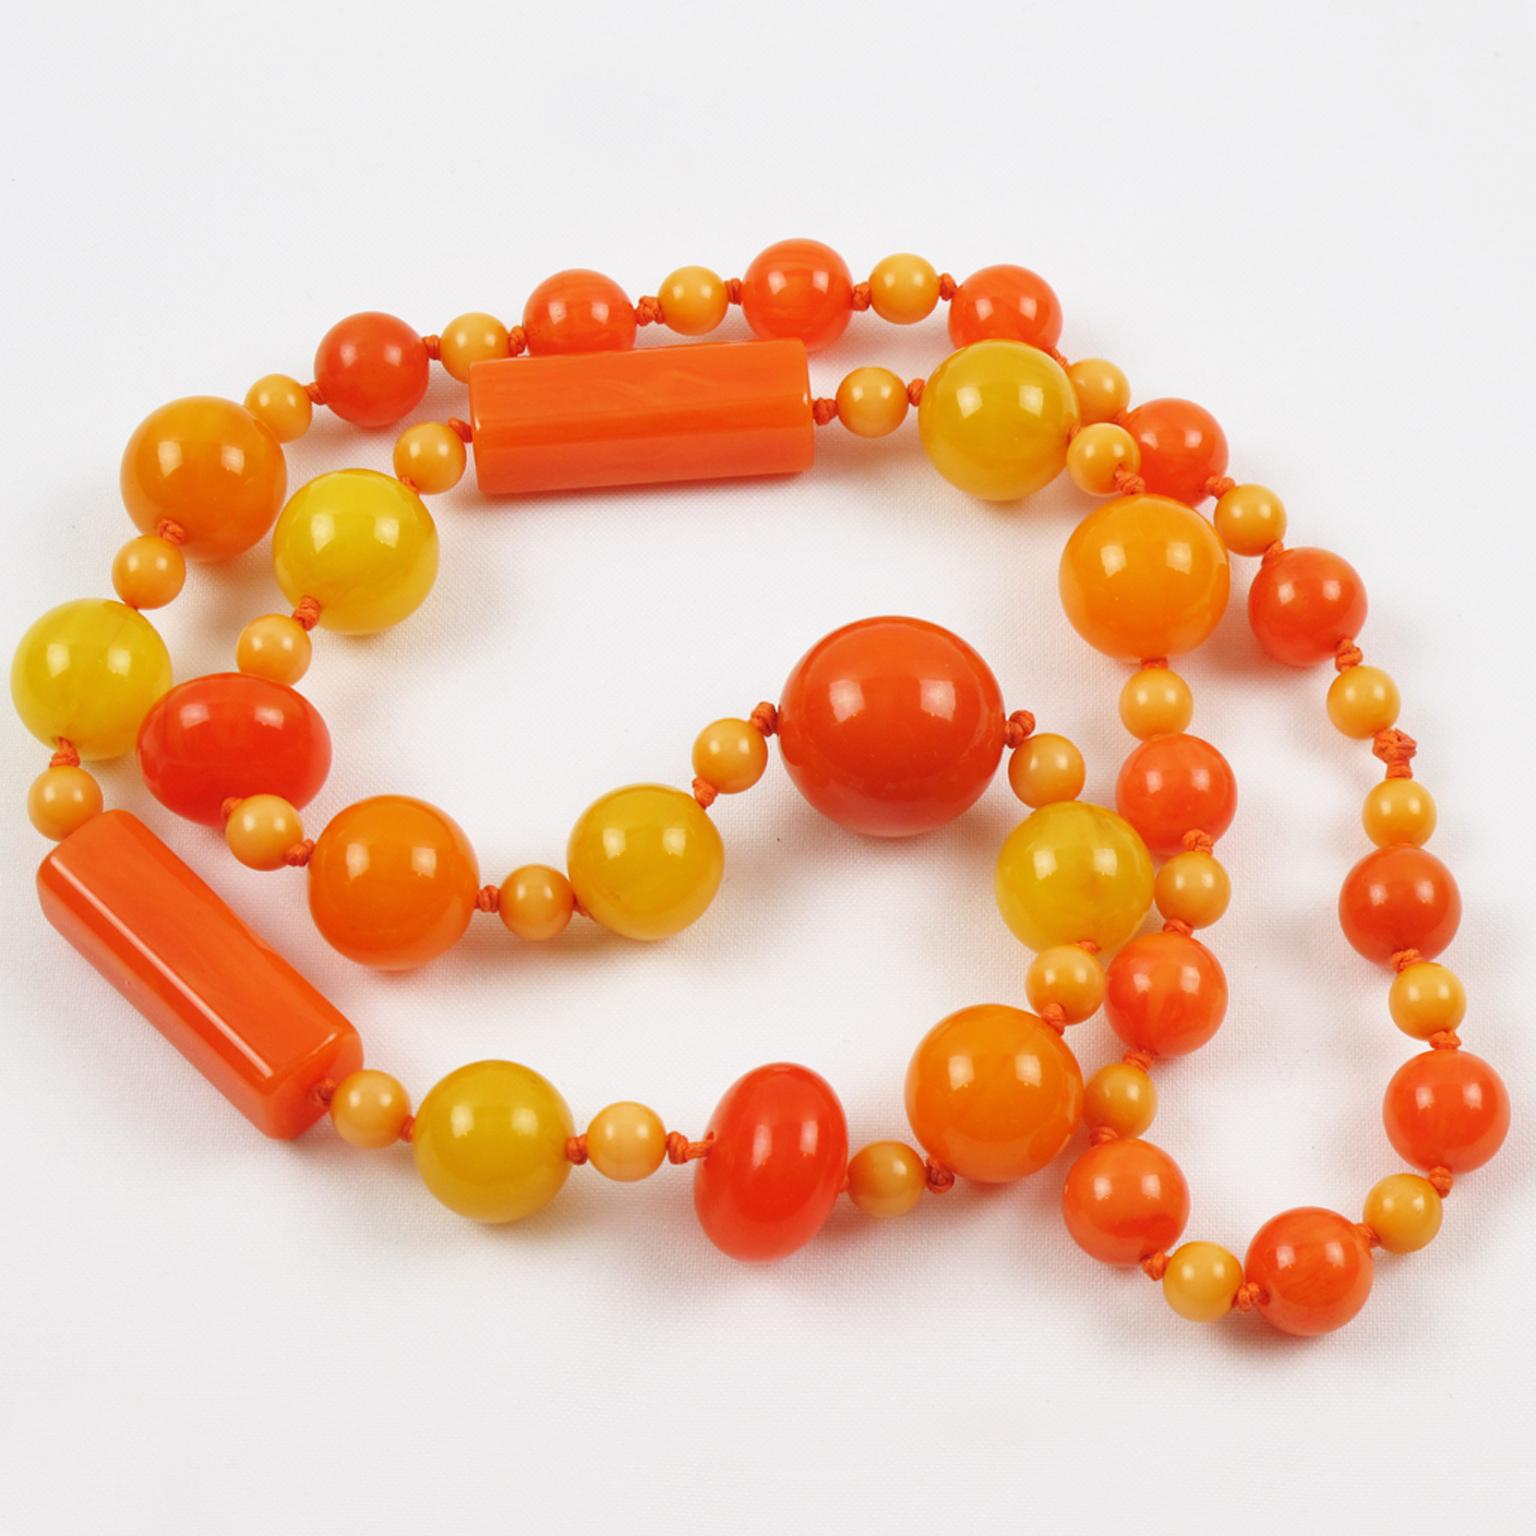 Extra Long Bakelite Necklace Sunny Summer Colors Marble Beads 1